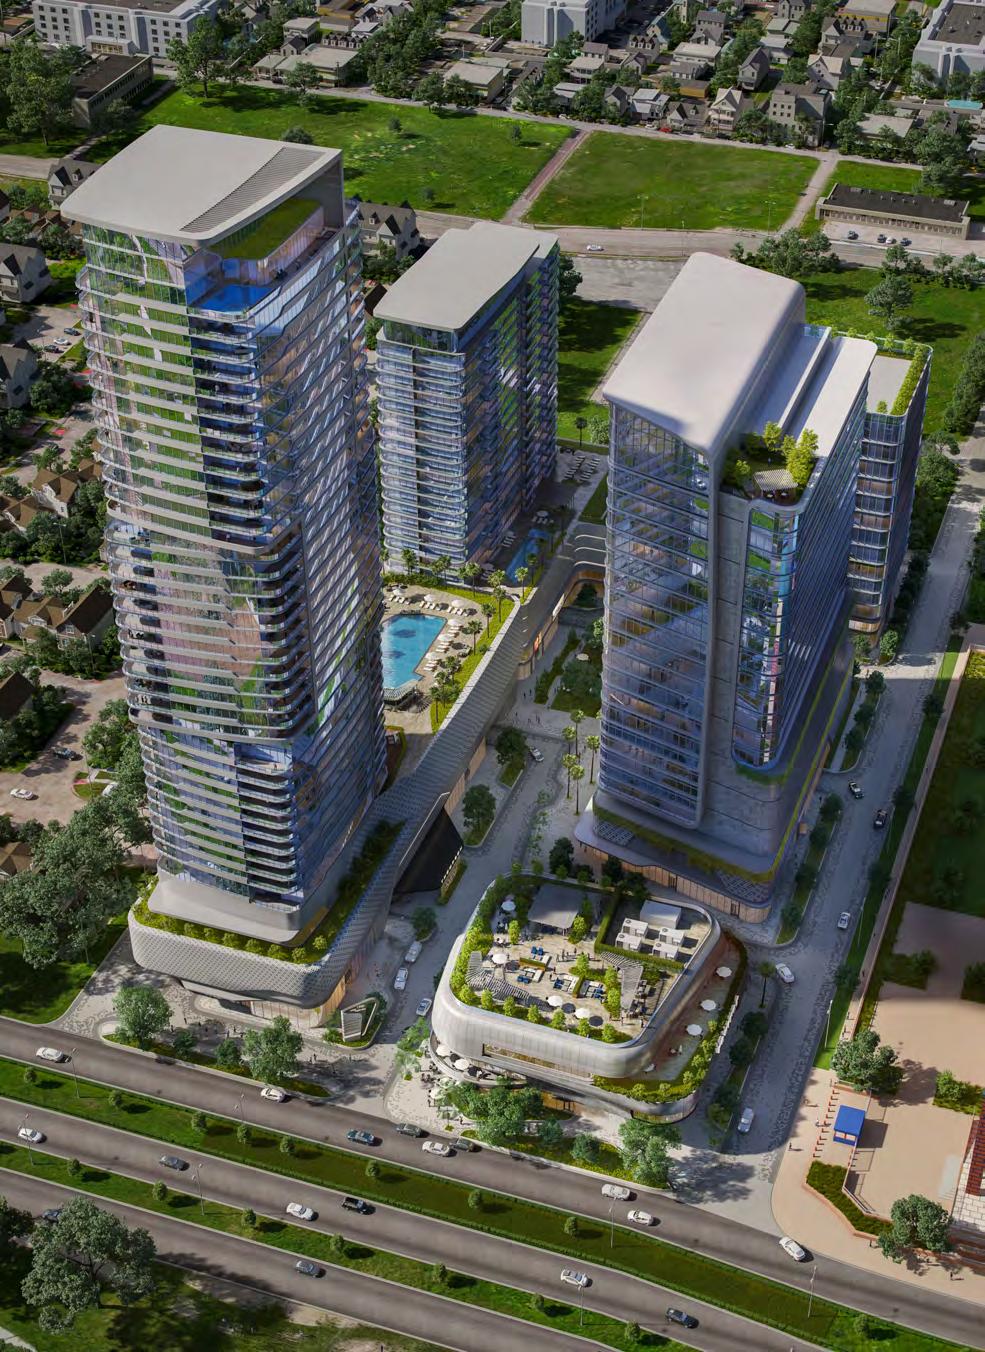 WITH ONE GLANCE, YOU CAN SEE THE FUTURE $500 million development 180 premier hotel rooms 99 luxury condos 24-floor full service office tower 6-acre site across from